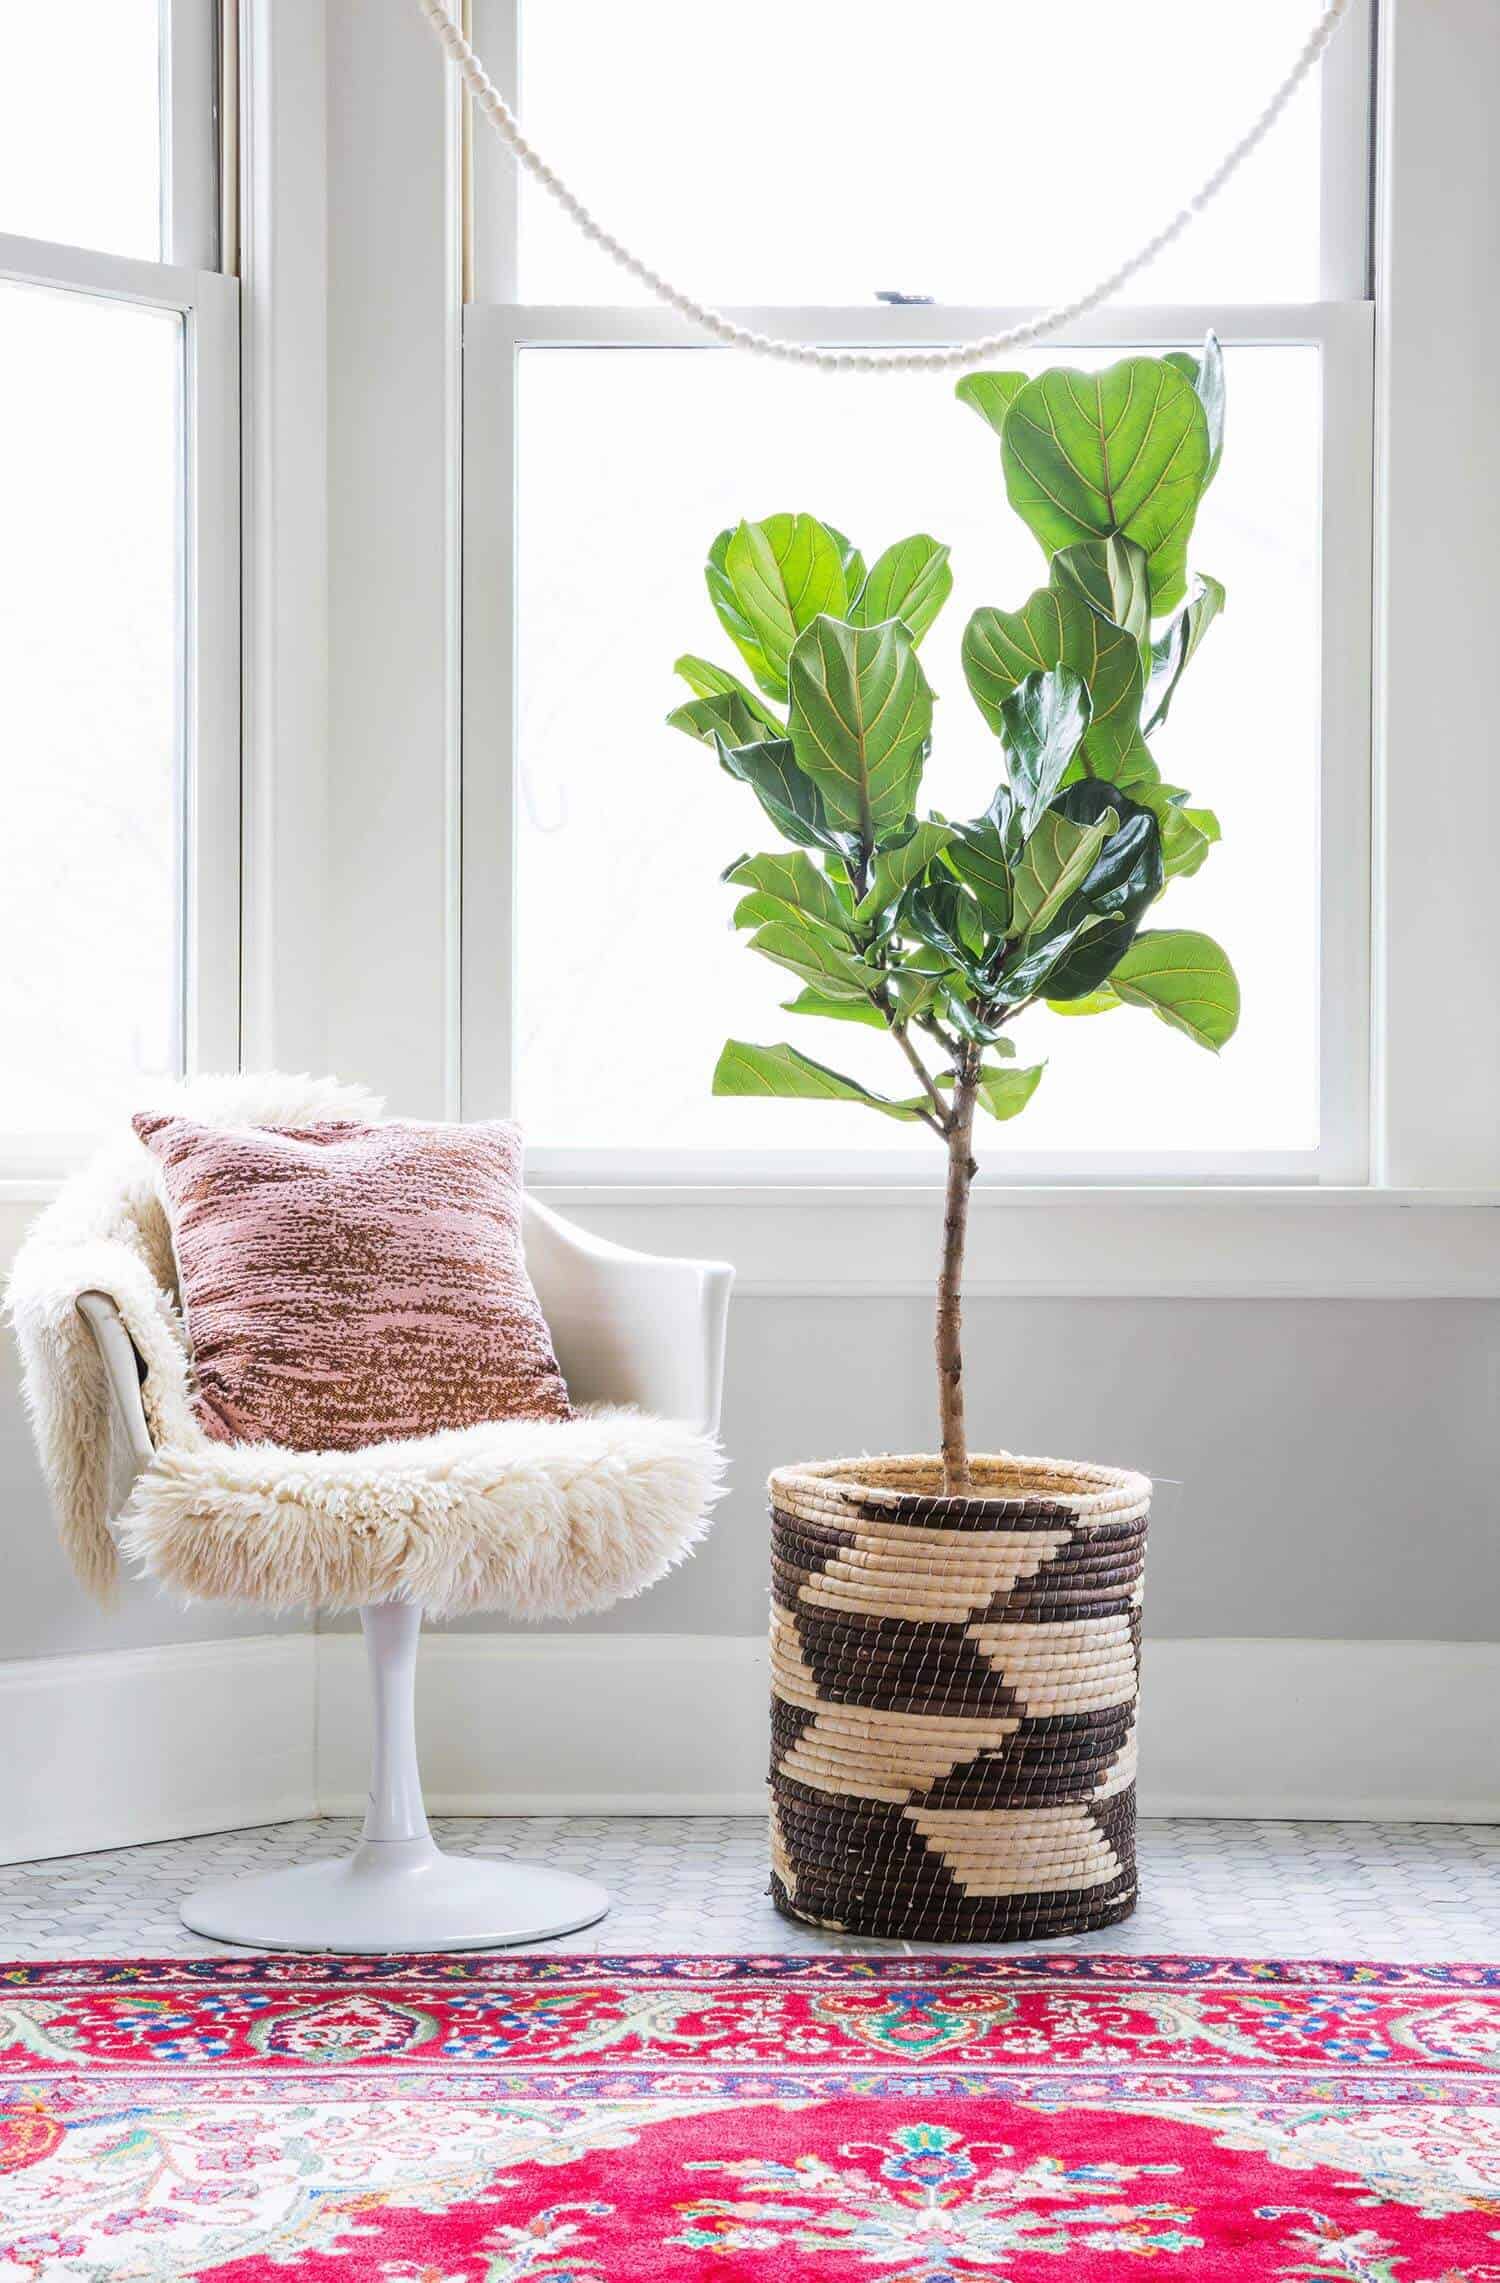 20 Tips for Caring for Fiddle Leaf Figs   A Beautiful Mess